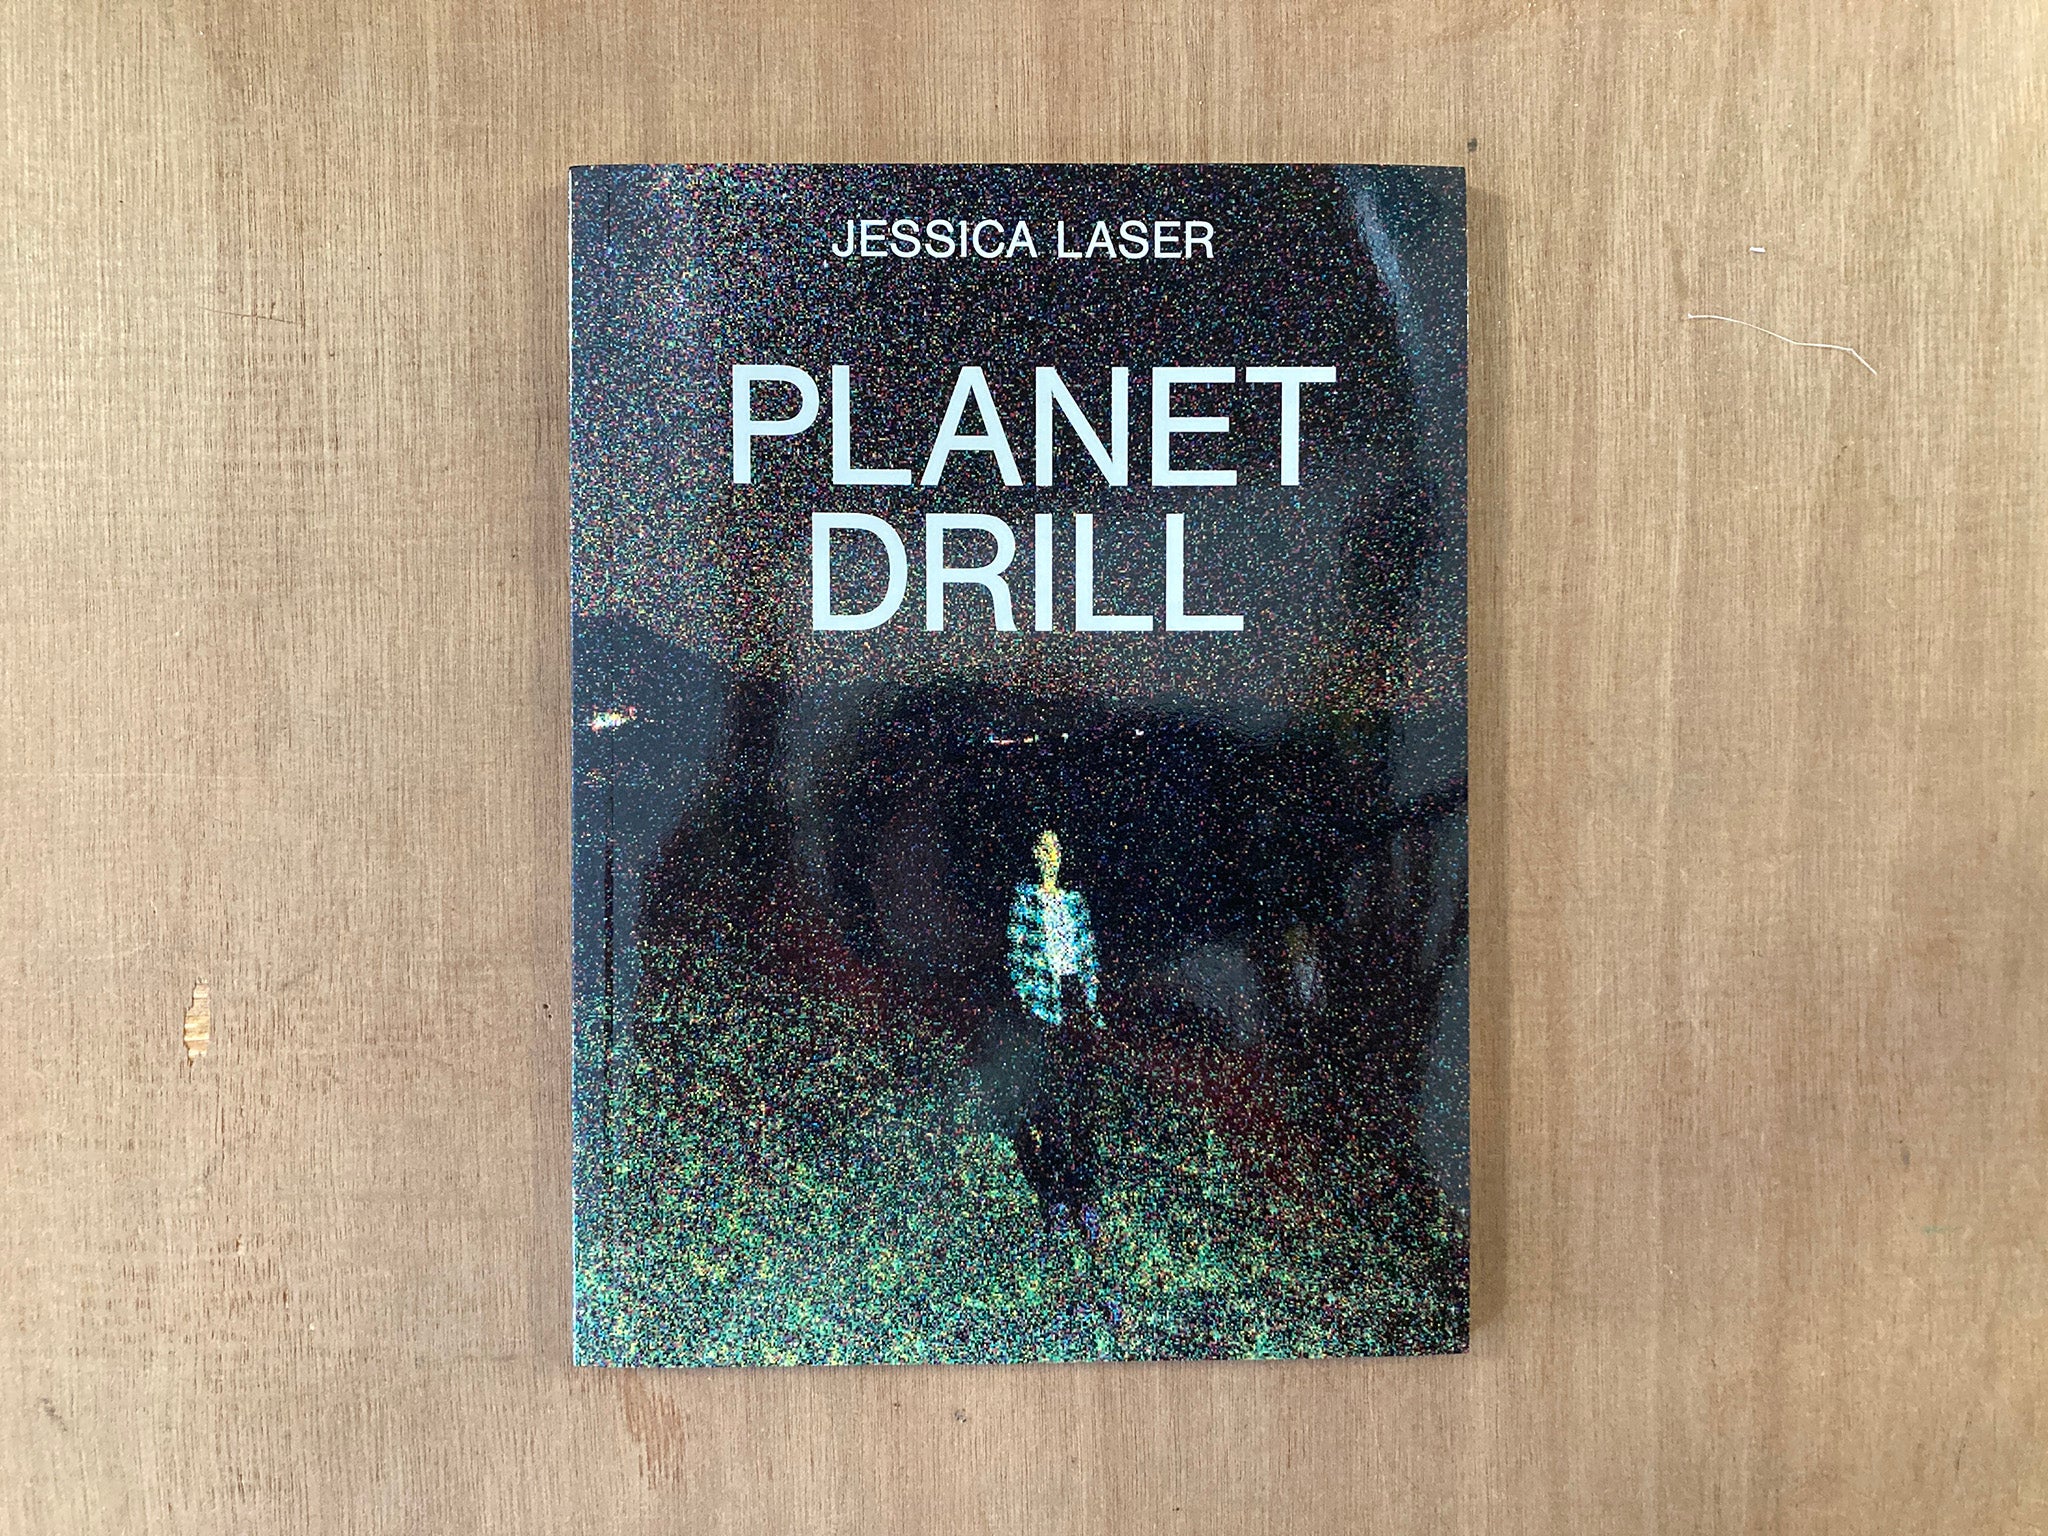 PLANET DRILL by Jessica Laser